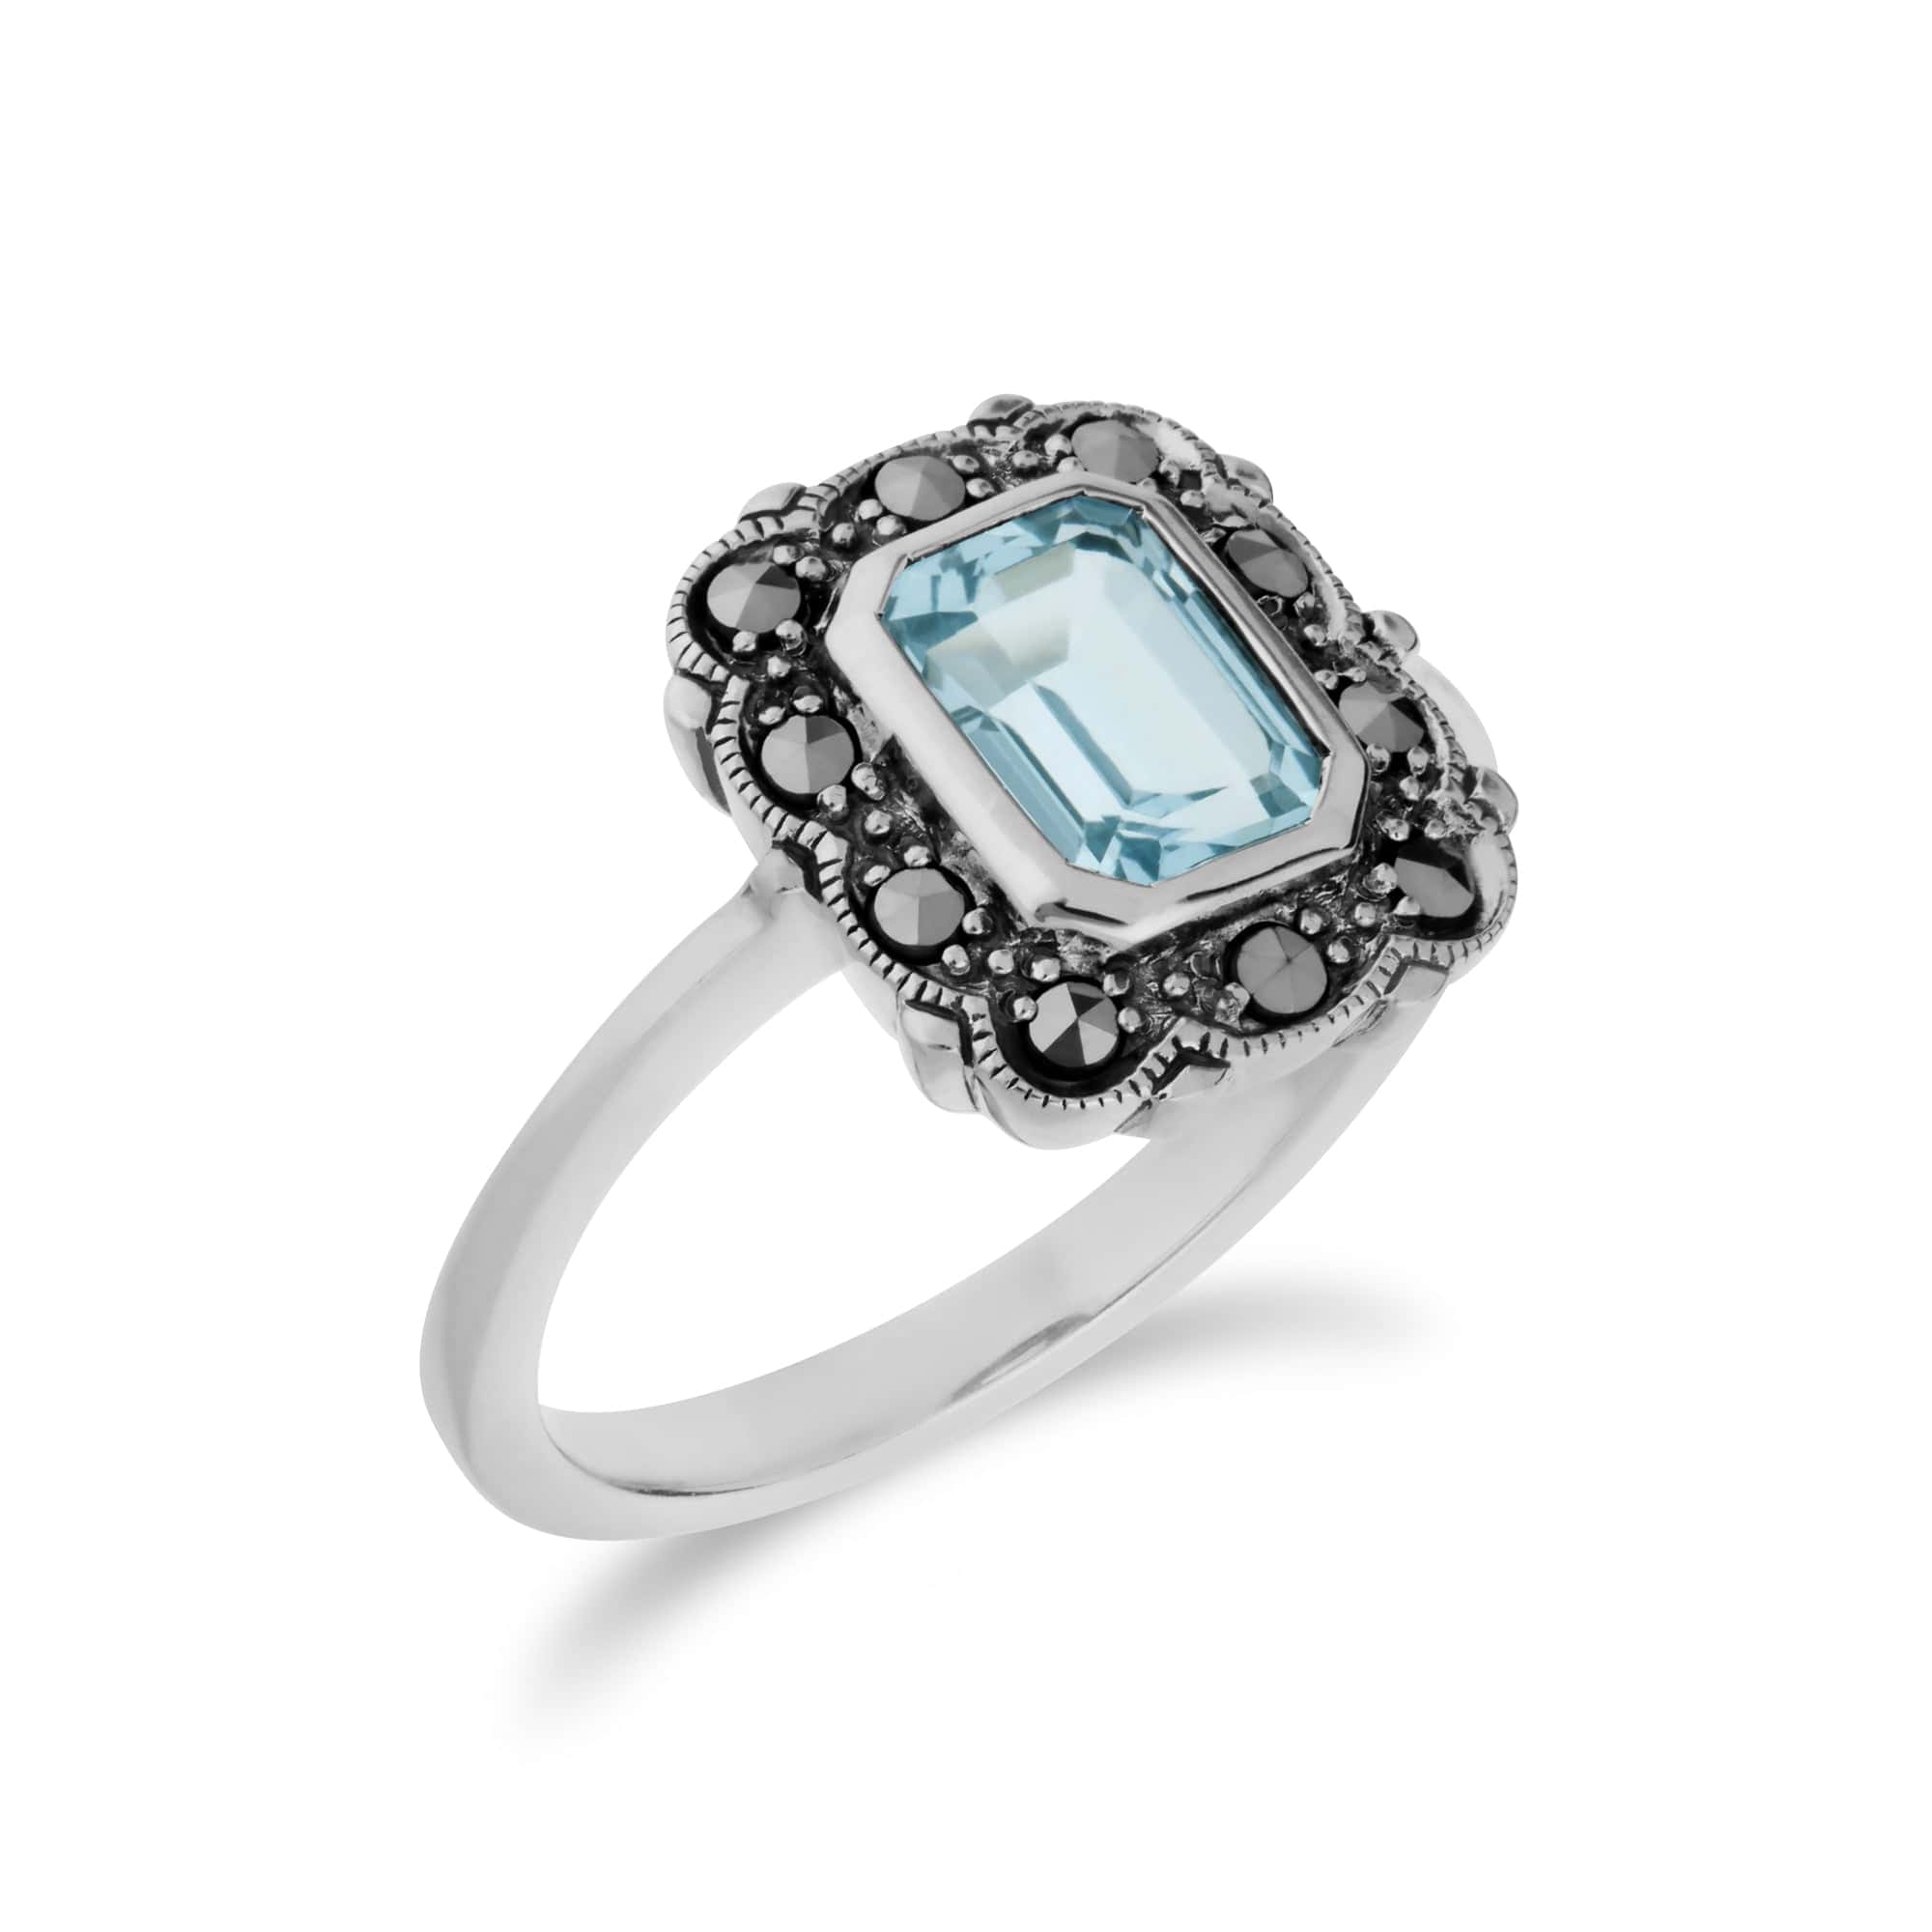 214R597103925 Art Nouveau Style Octagon Blue Topaz & Marcasite Border Ring in 925 Sterling Silver 2